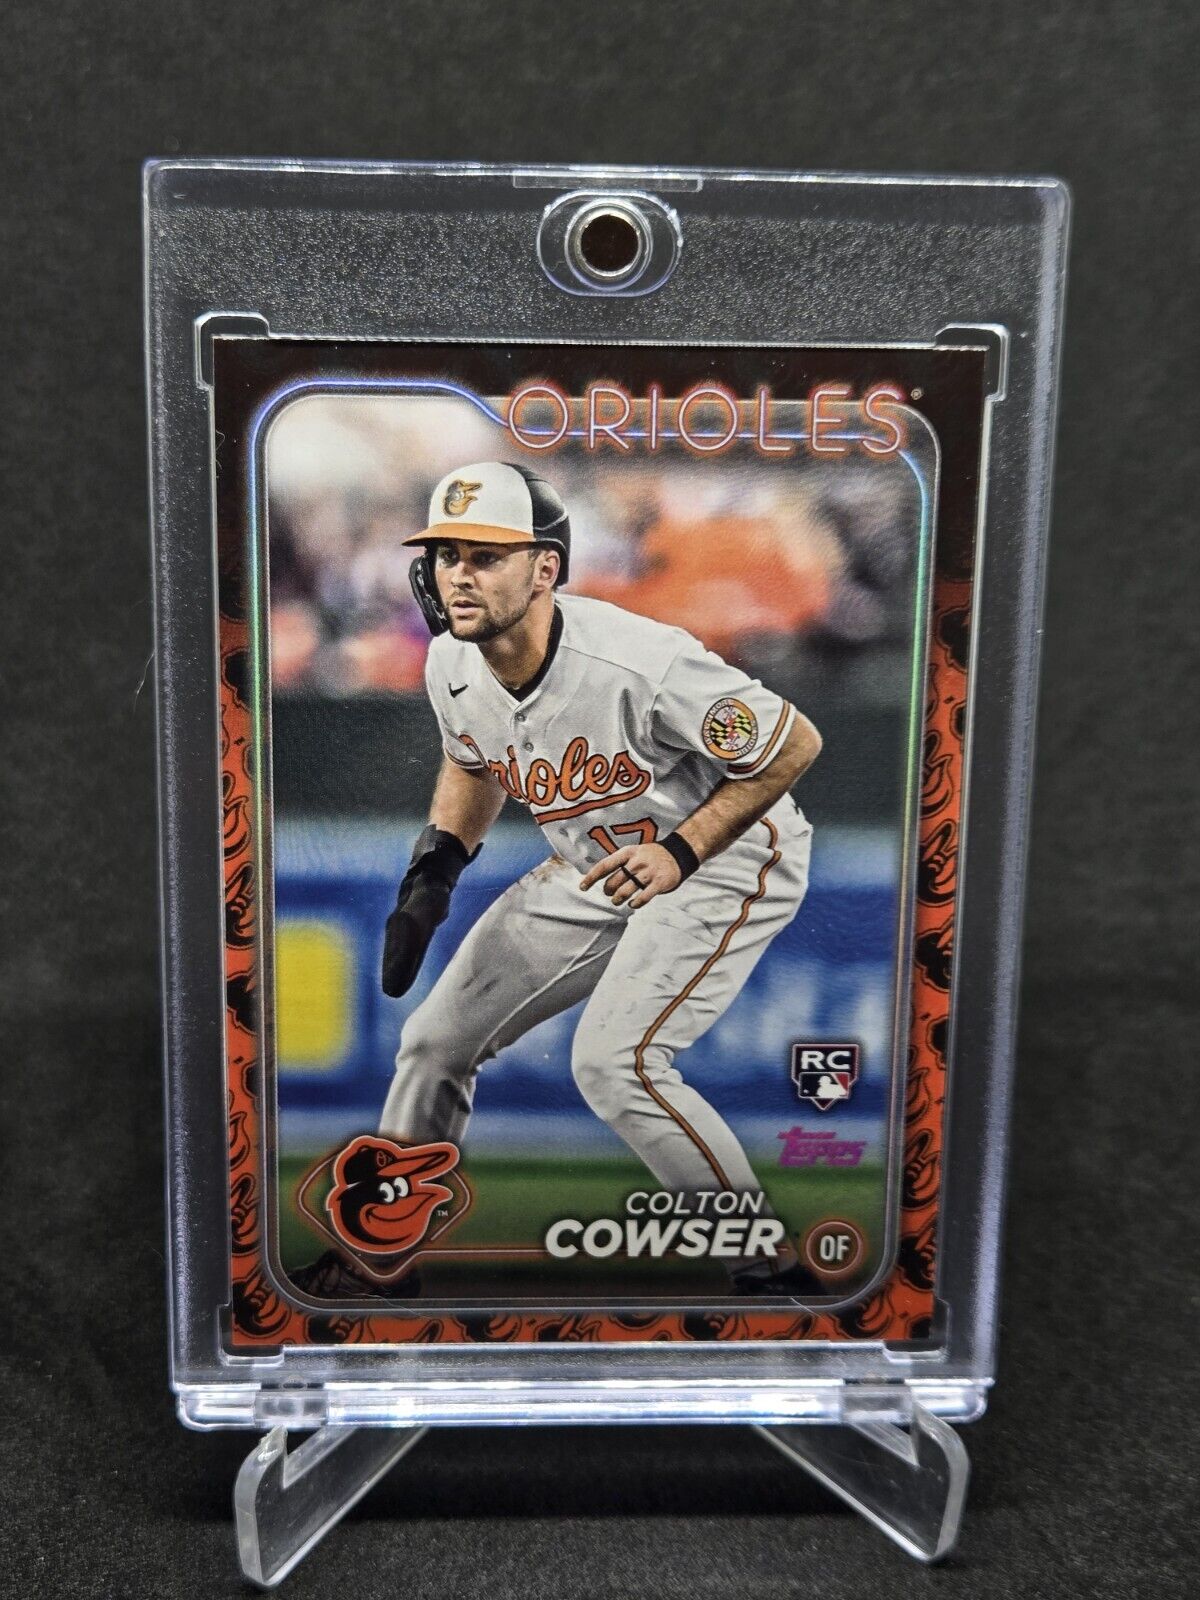 2024 Topps Series 1 Colton Cowser Team Color Foil rookie card